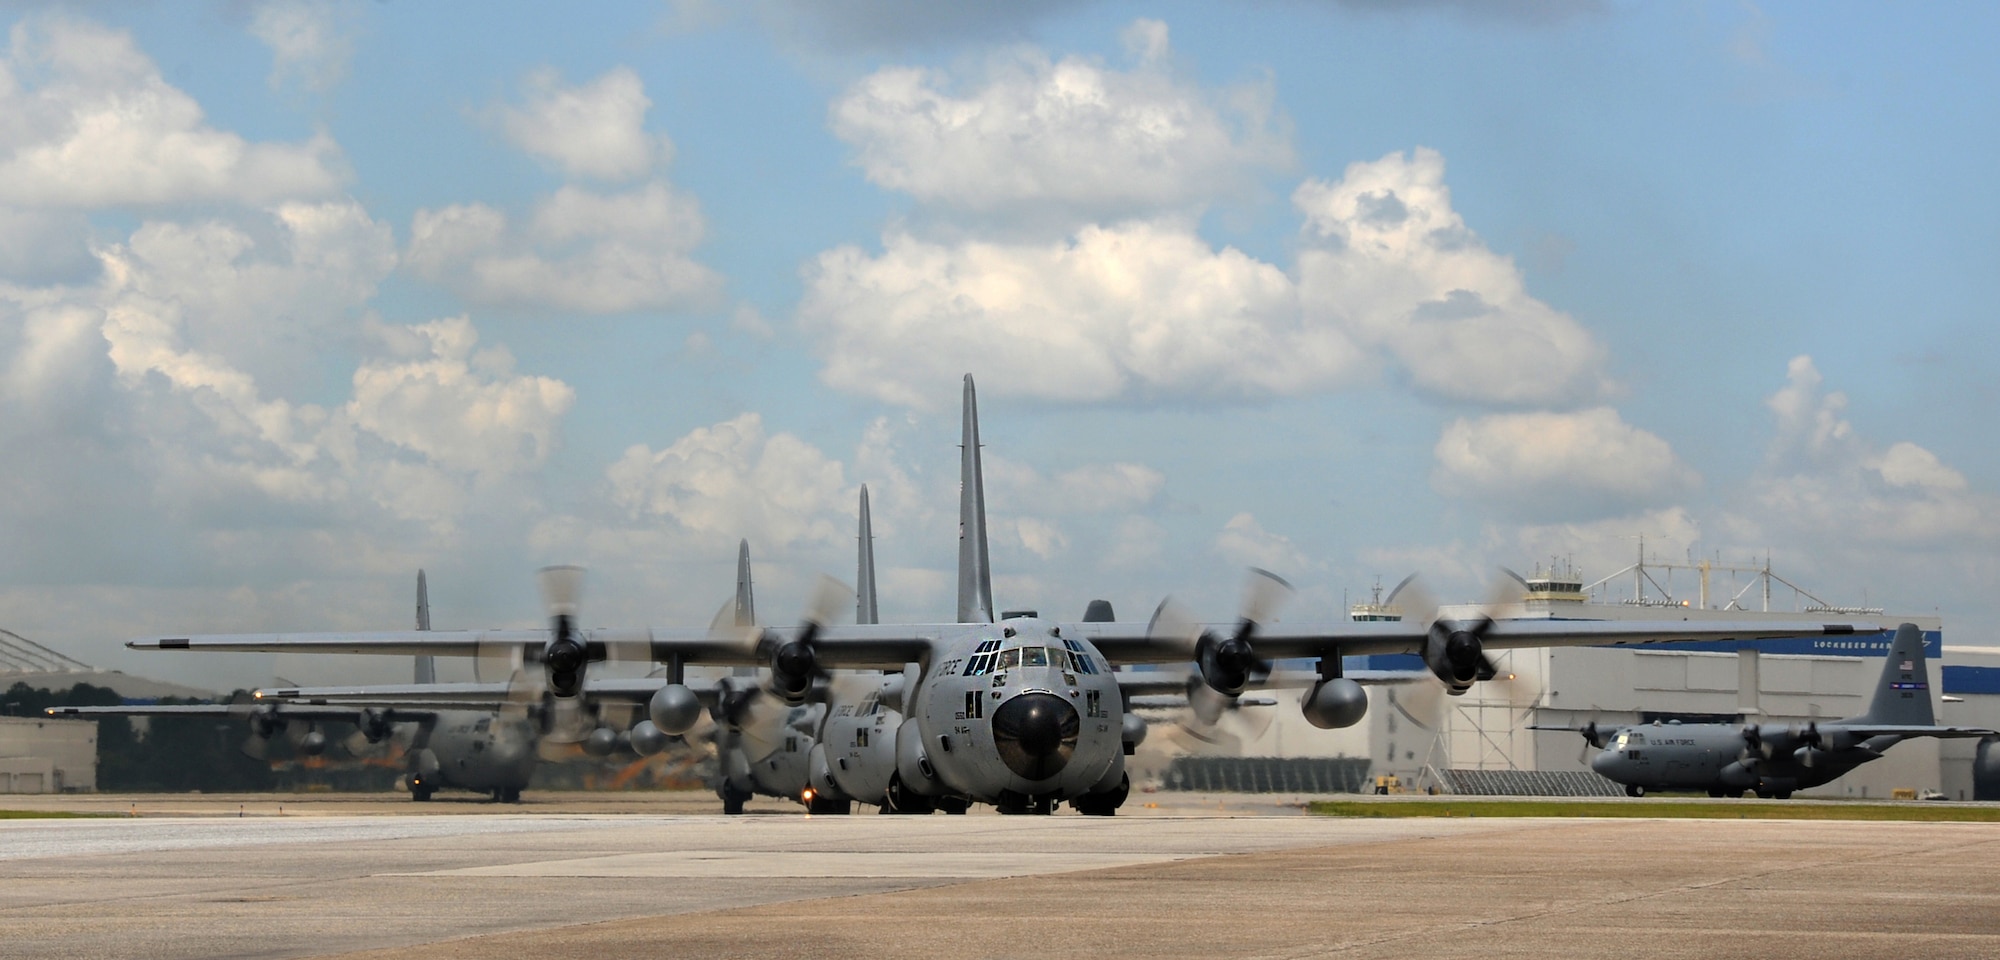 C-130s from the 94th Airlift Wing travel down the ramp at Dobbins Air Reserve Base, Ga. after a formation flight on July 9, 2016. The formation's flight path traversed over the metro Atlanta area and gave the wing's Airmen a chance to showcase their skills in view of the local community. (U.S. Air Force photo by Staff Sgt. Alan Abernethy)